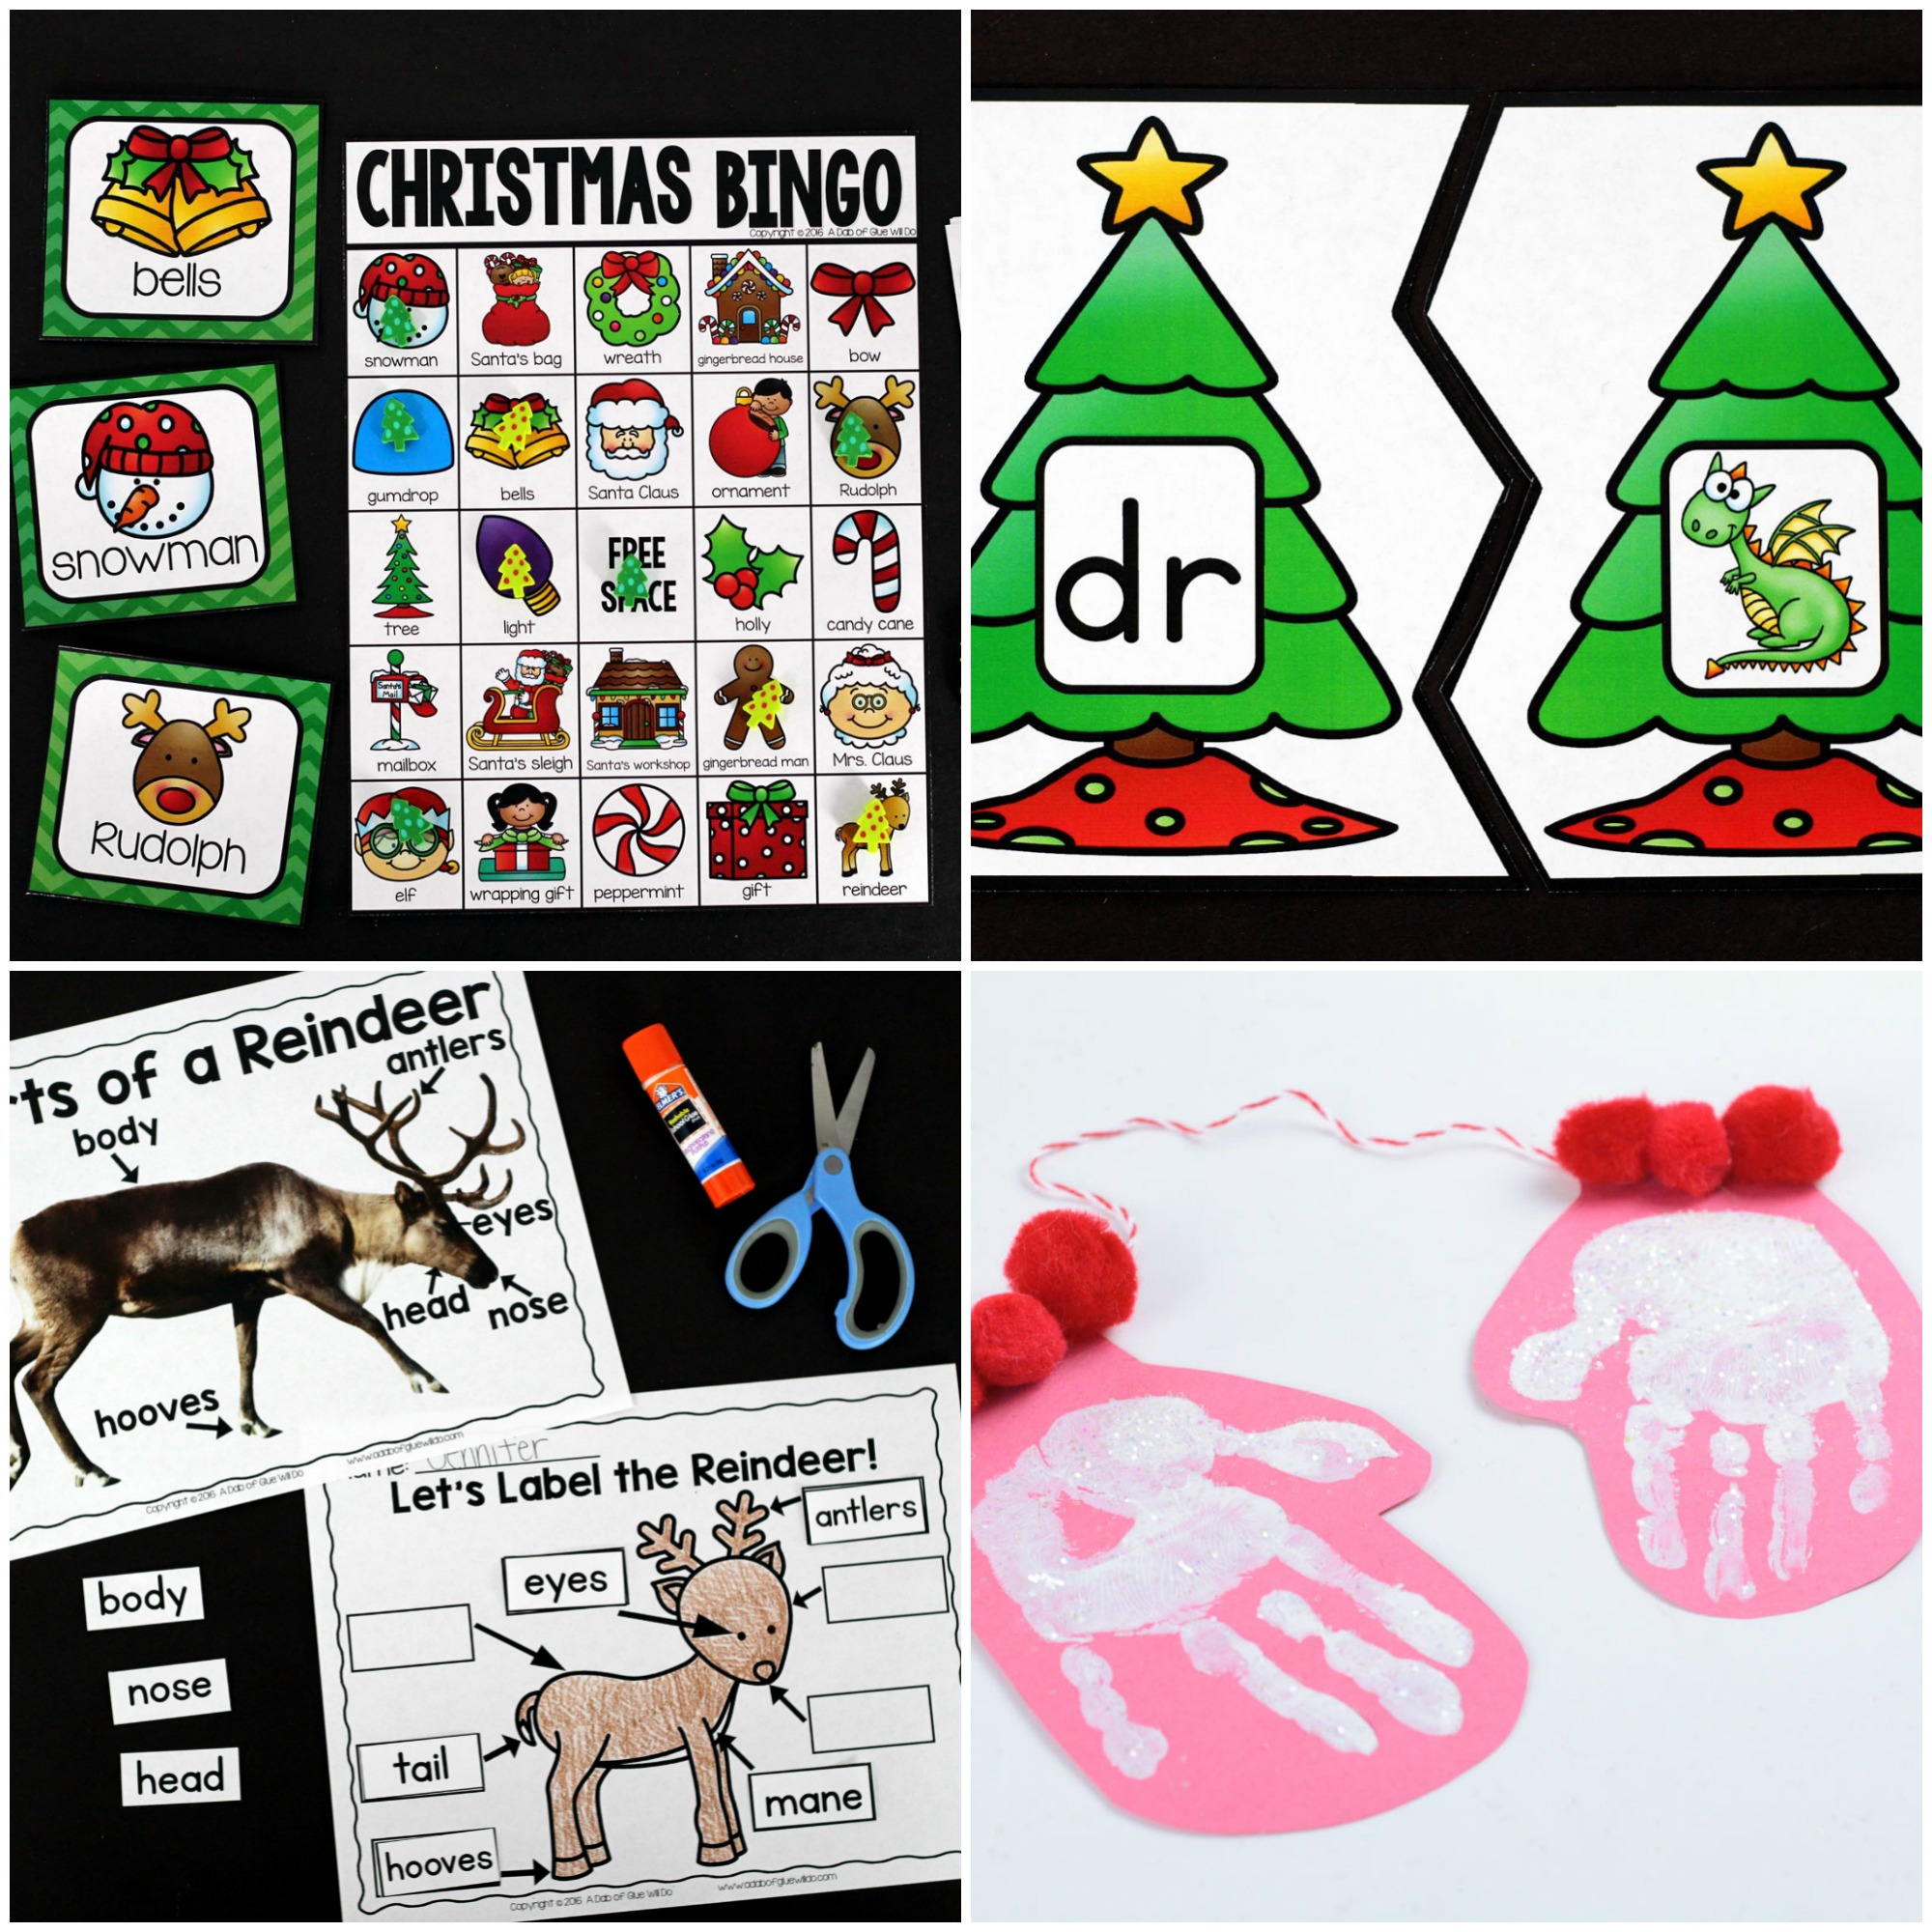 Christmas printables and Christmas craft ideas for your winter learning! Grab these free Christmas downloads as your go to Christmas learning resources!